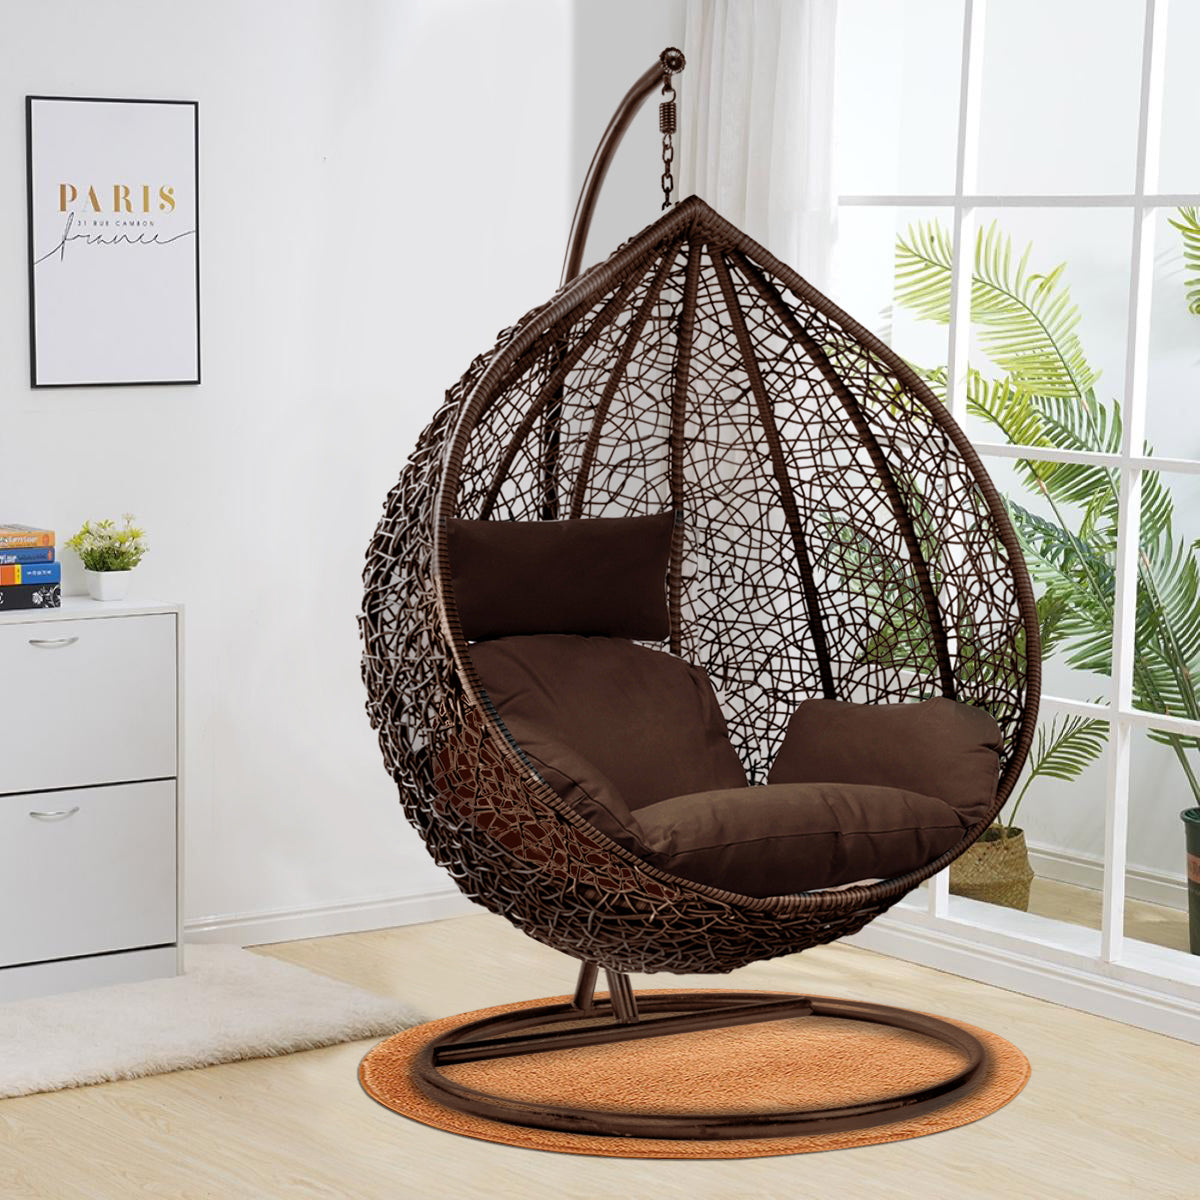 egg chair with legs, garden swing chair, DHS the egg chair, egg hammock chair, basket swing chairs, black egg chair, hanging egg chair with stand, blisswood standing egg chair, outdoor hanging egg chair, garden-line egg chair, outdoor egg chair with stand, egg shell chair swing, egg chair with stand, outdoor egg swing chair